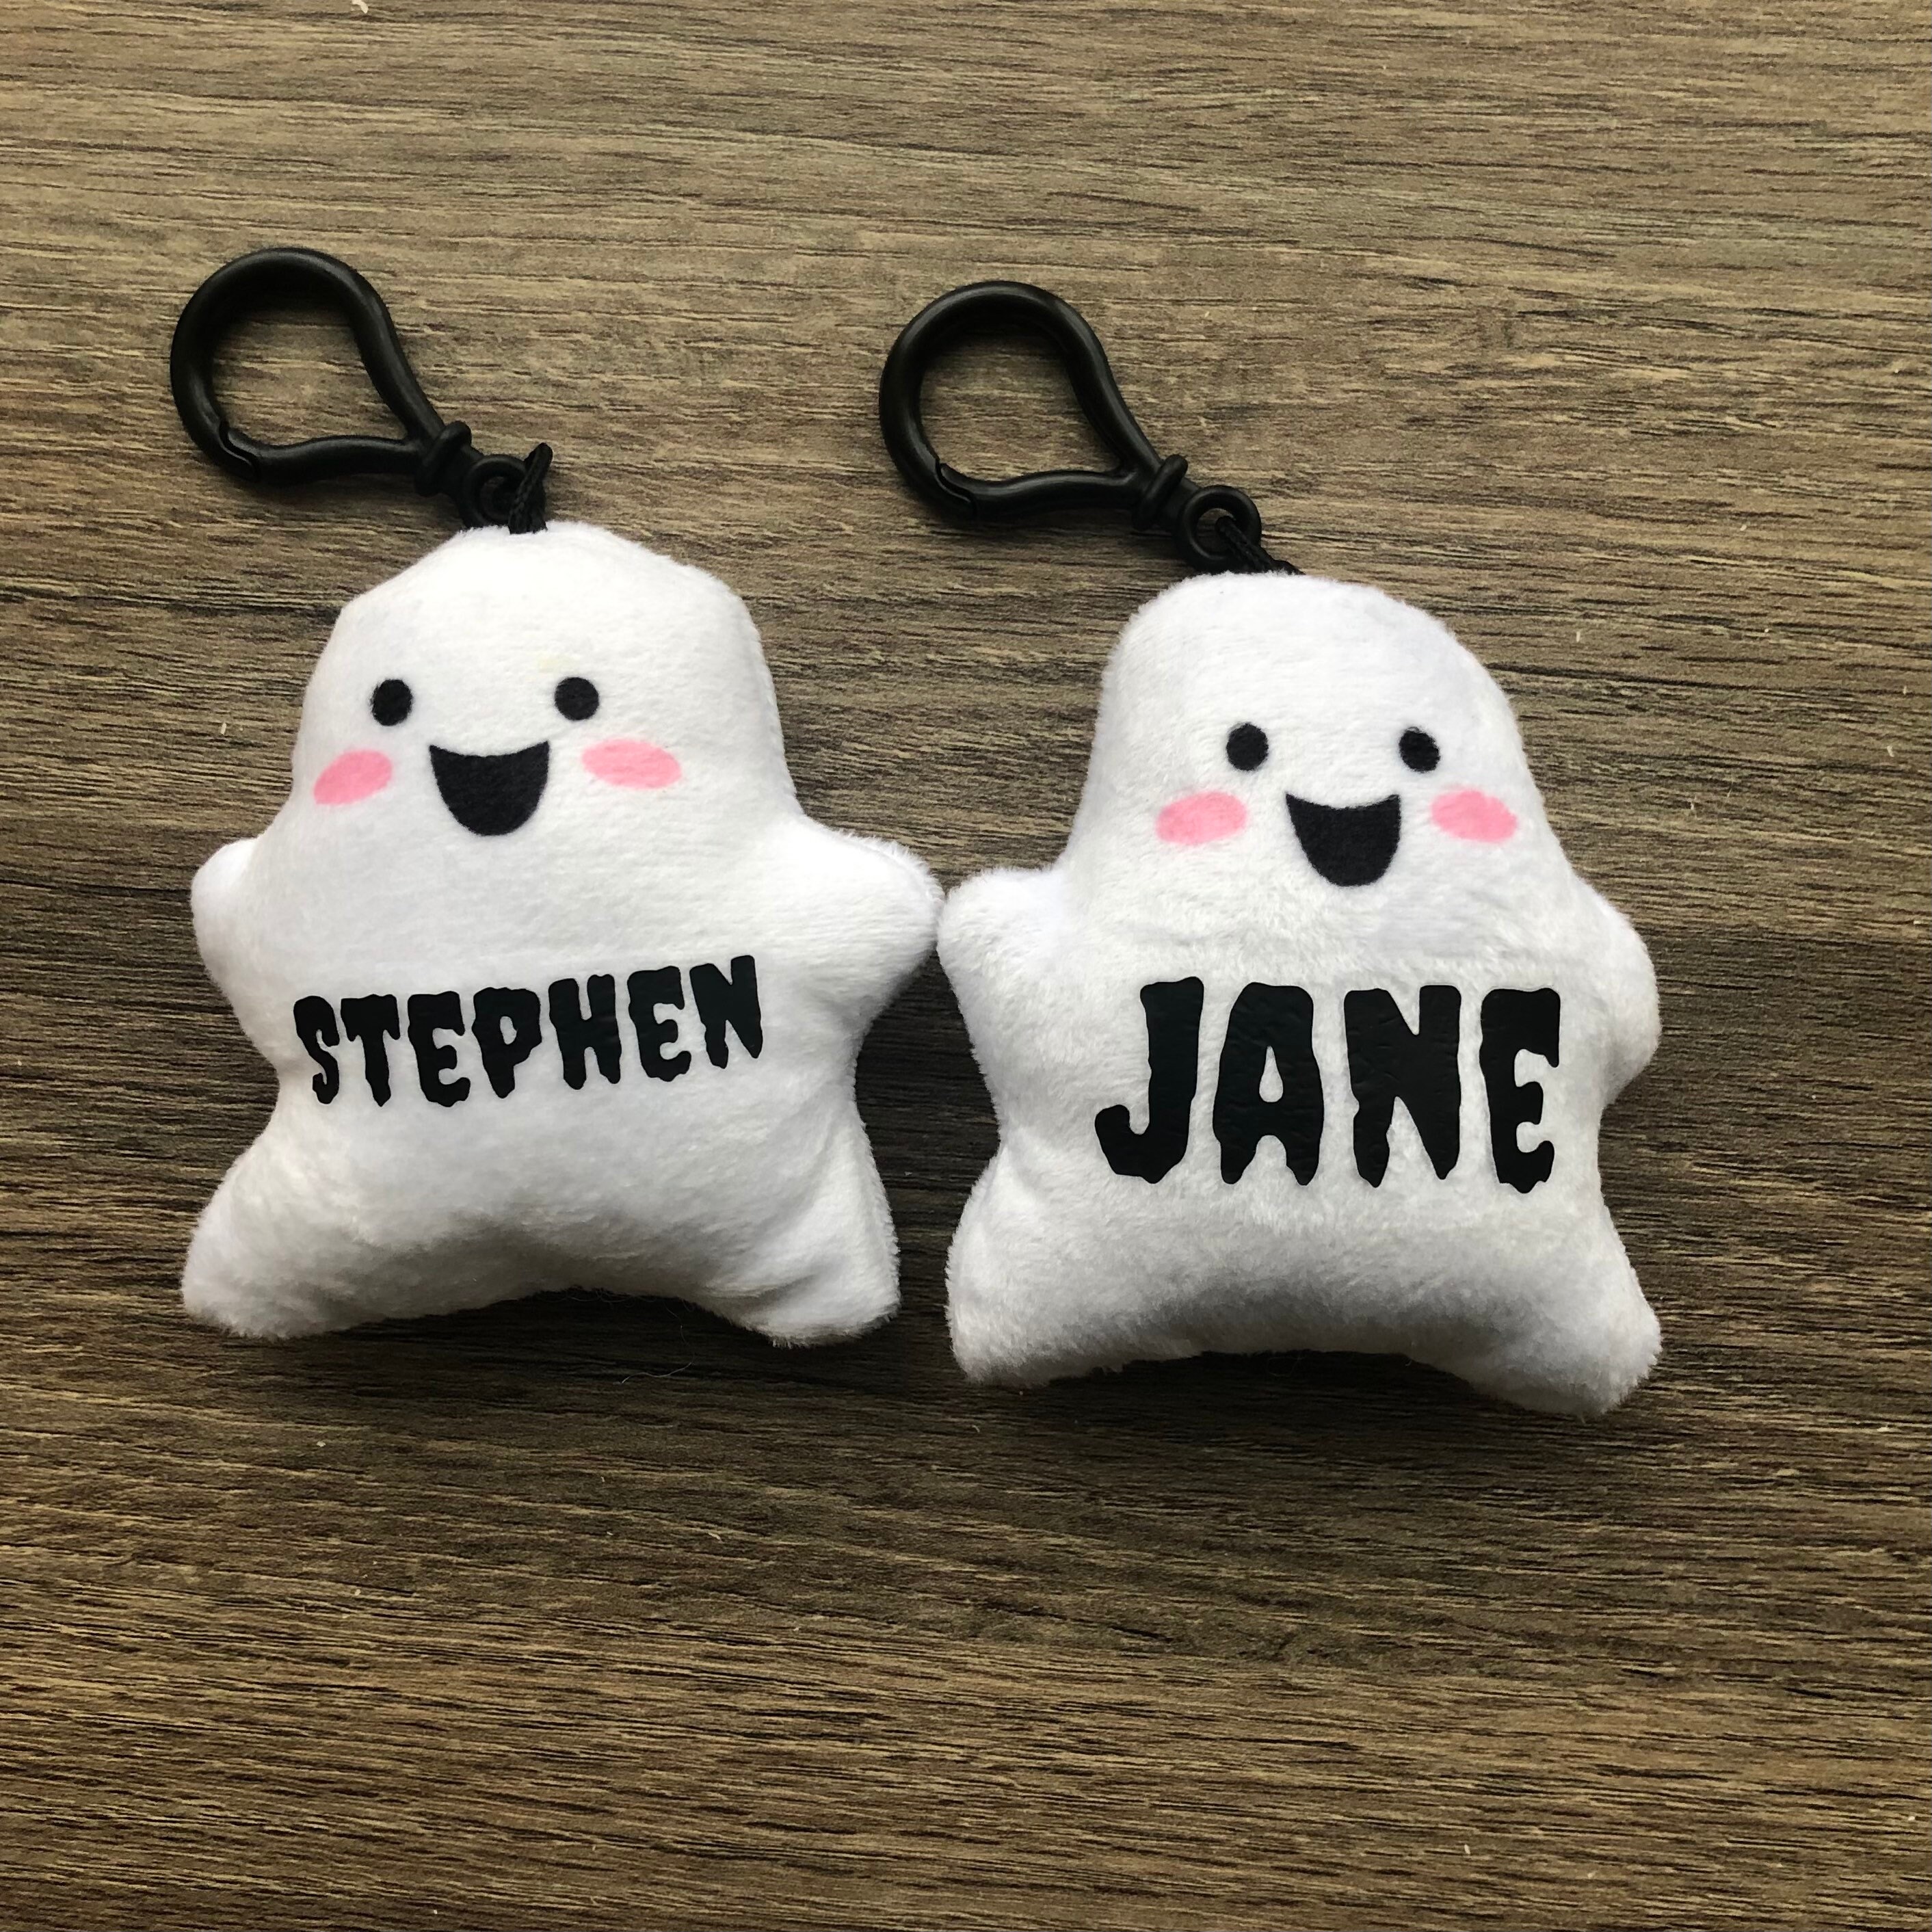 Ghost Plush Keychain Clips(Please Read Description To Purchase)